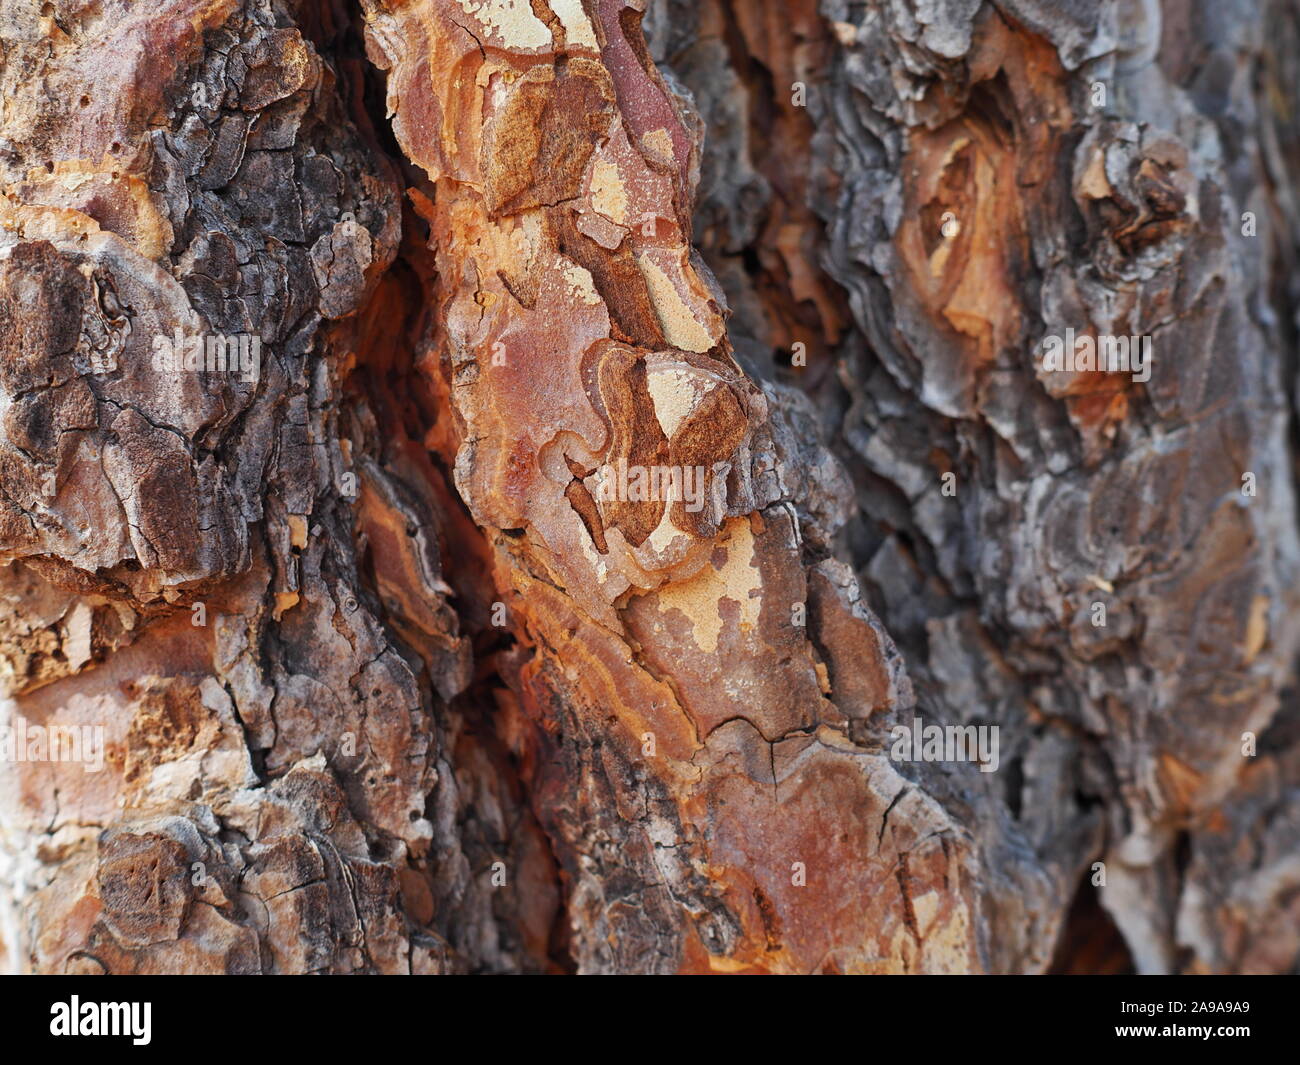 Ponderosa Pine tree bark detail showing thickness of the bark as a guard against wildfire - great and colourful abstract or background image Stock Photo